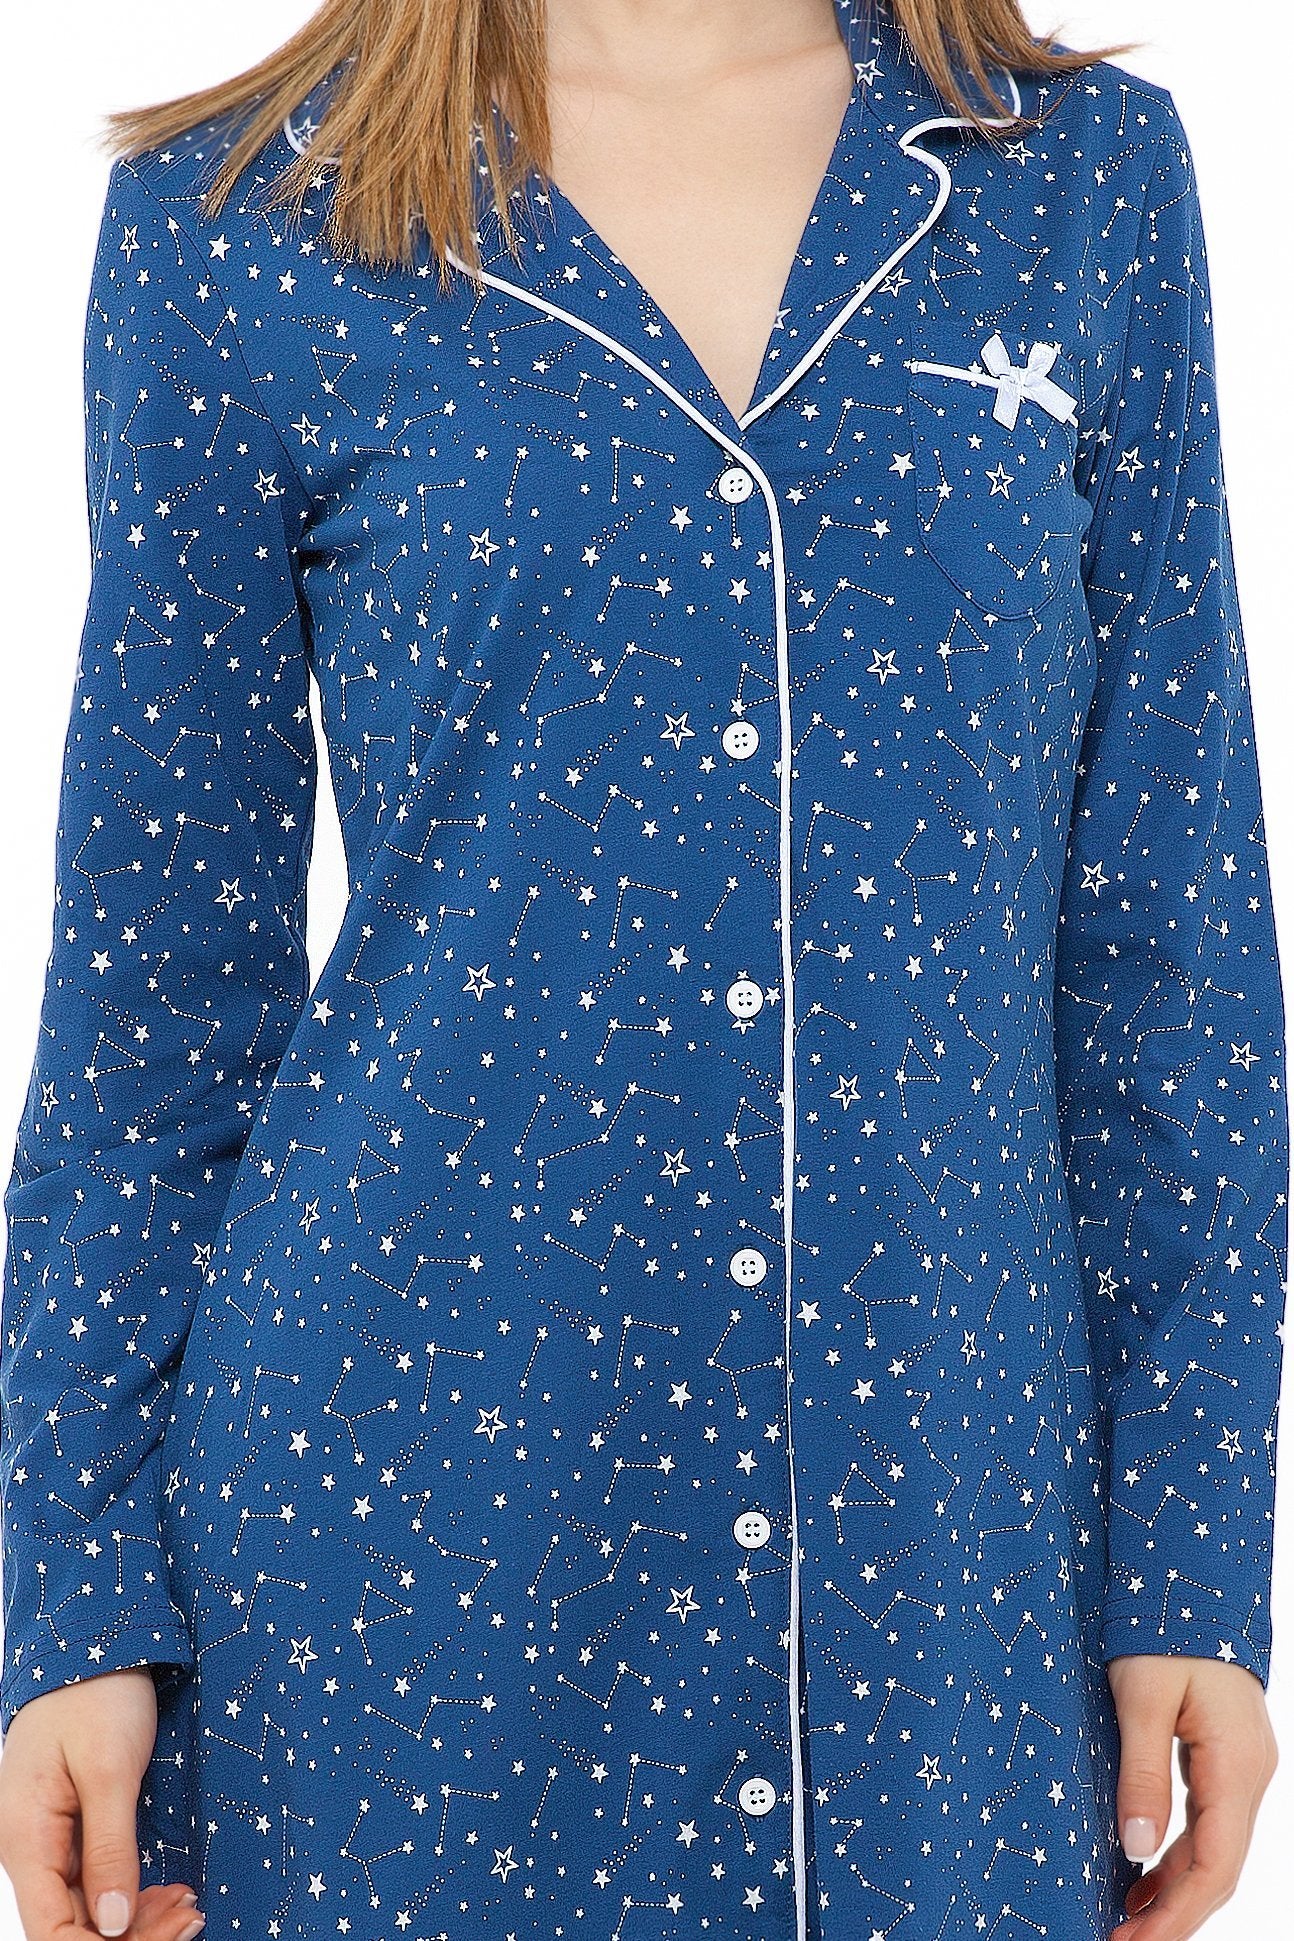 chassca nightdress with galaxy print - Breakmood